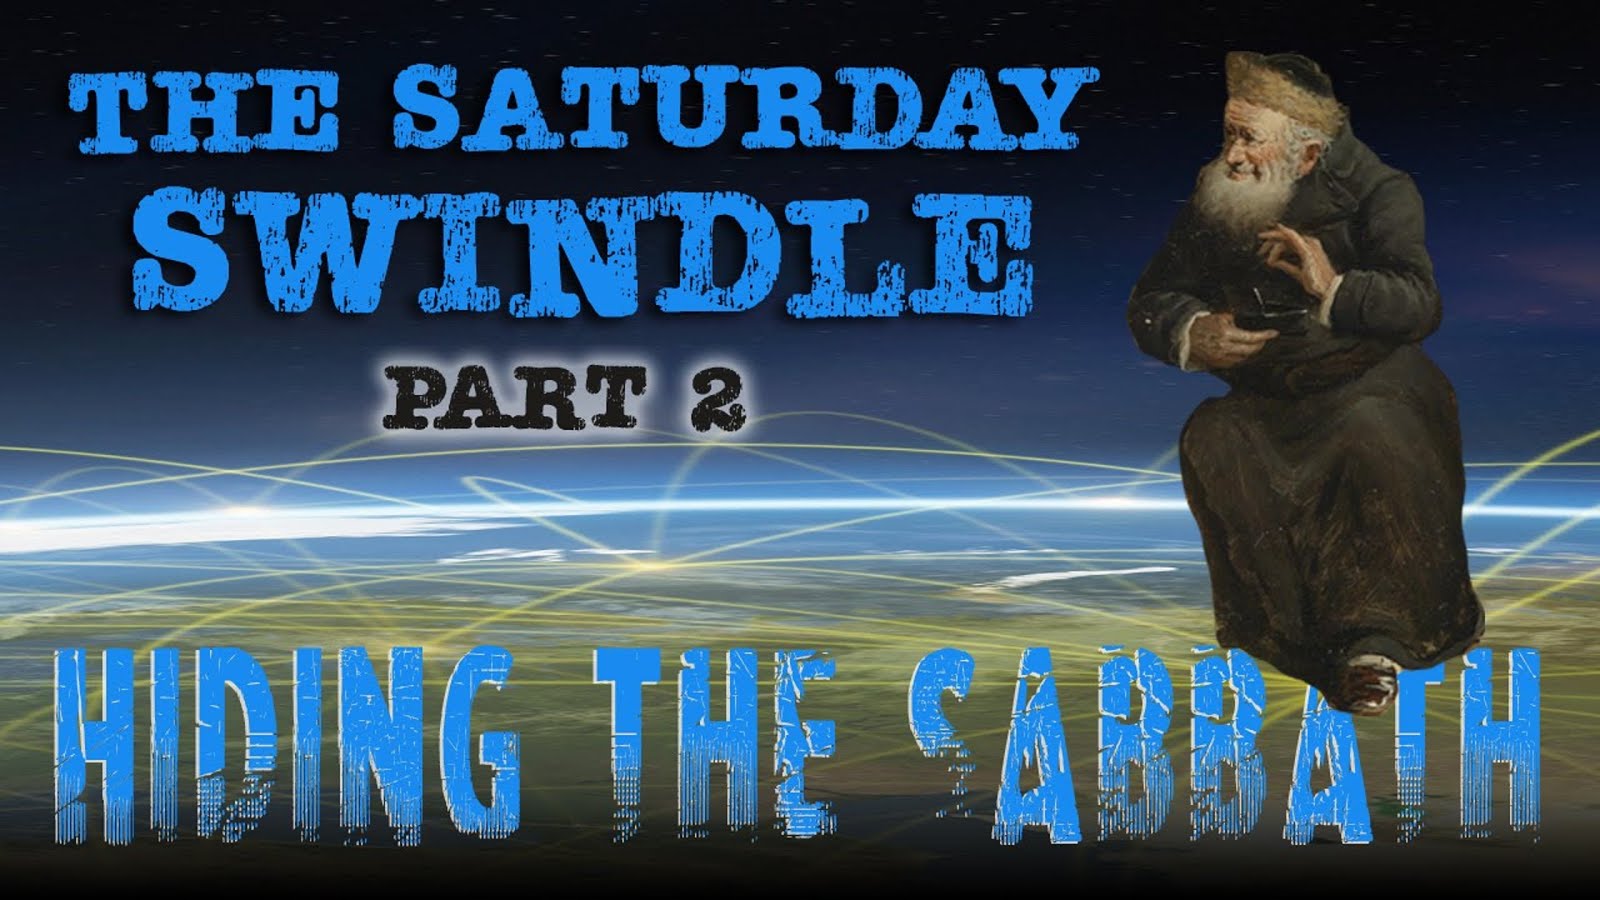 THE SATURDAY SWINDLE - PART 2